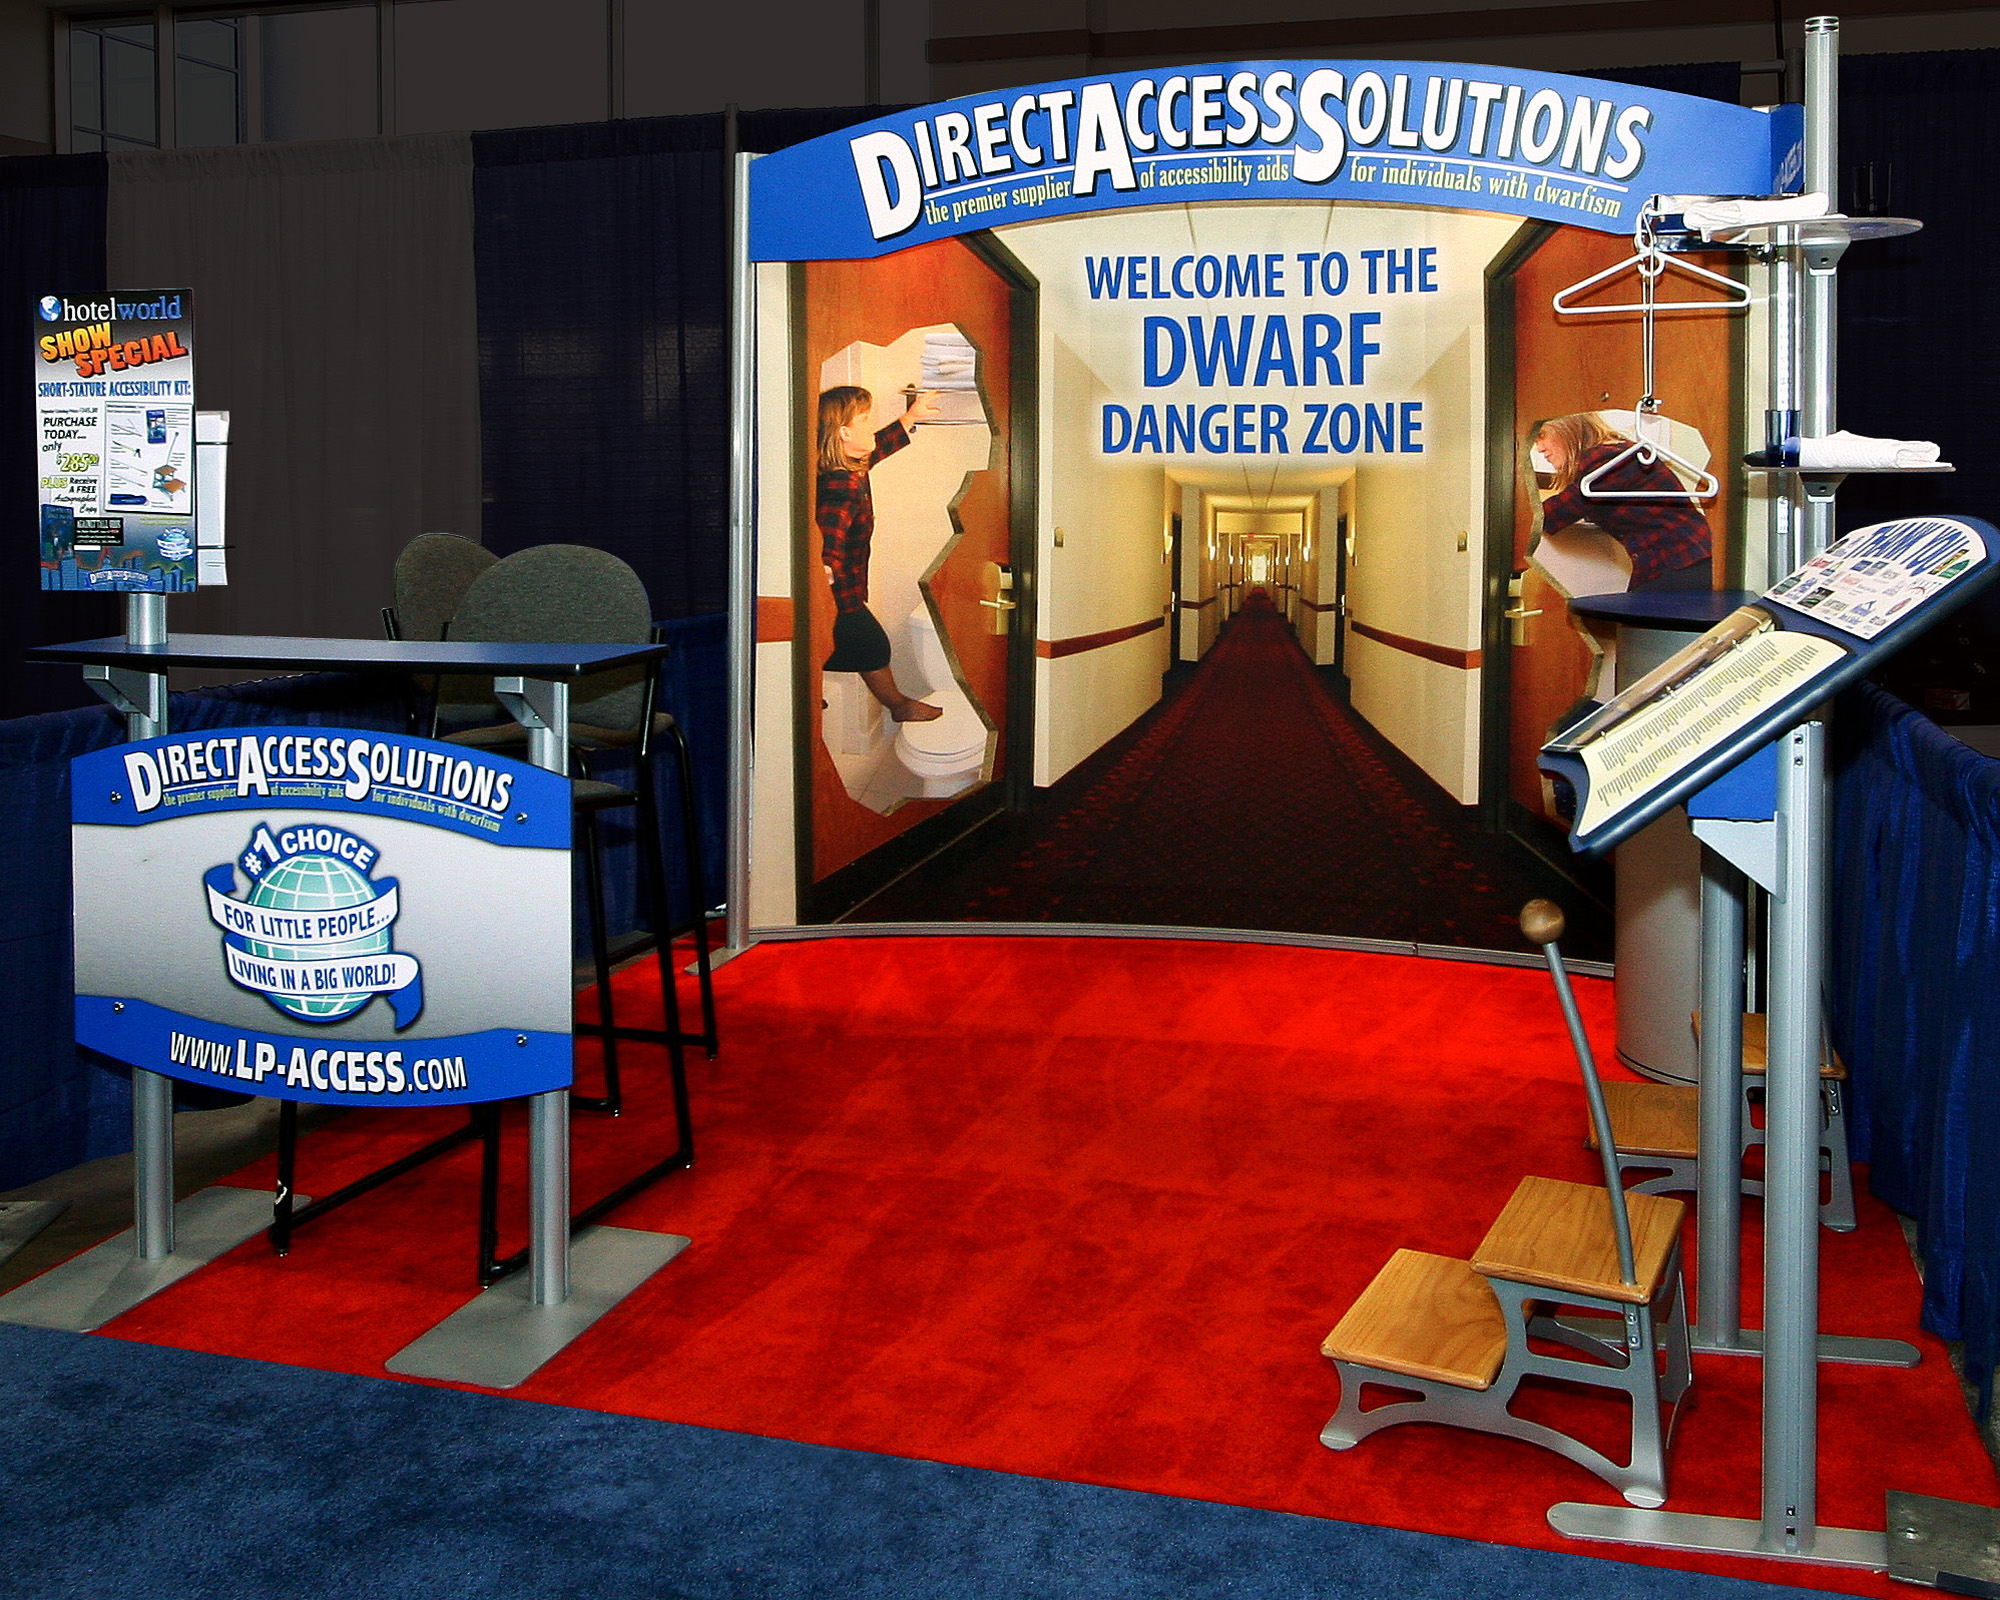 Direct Access Solutions